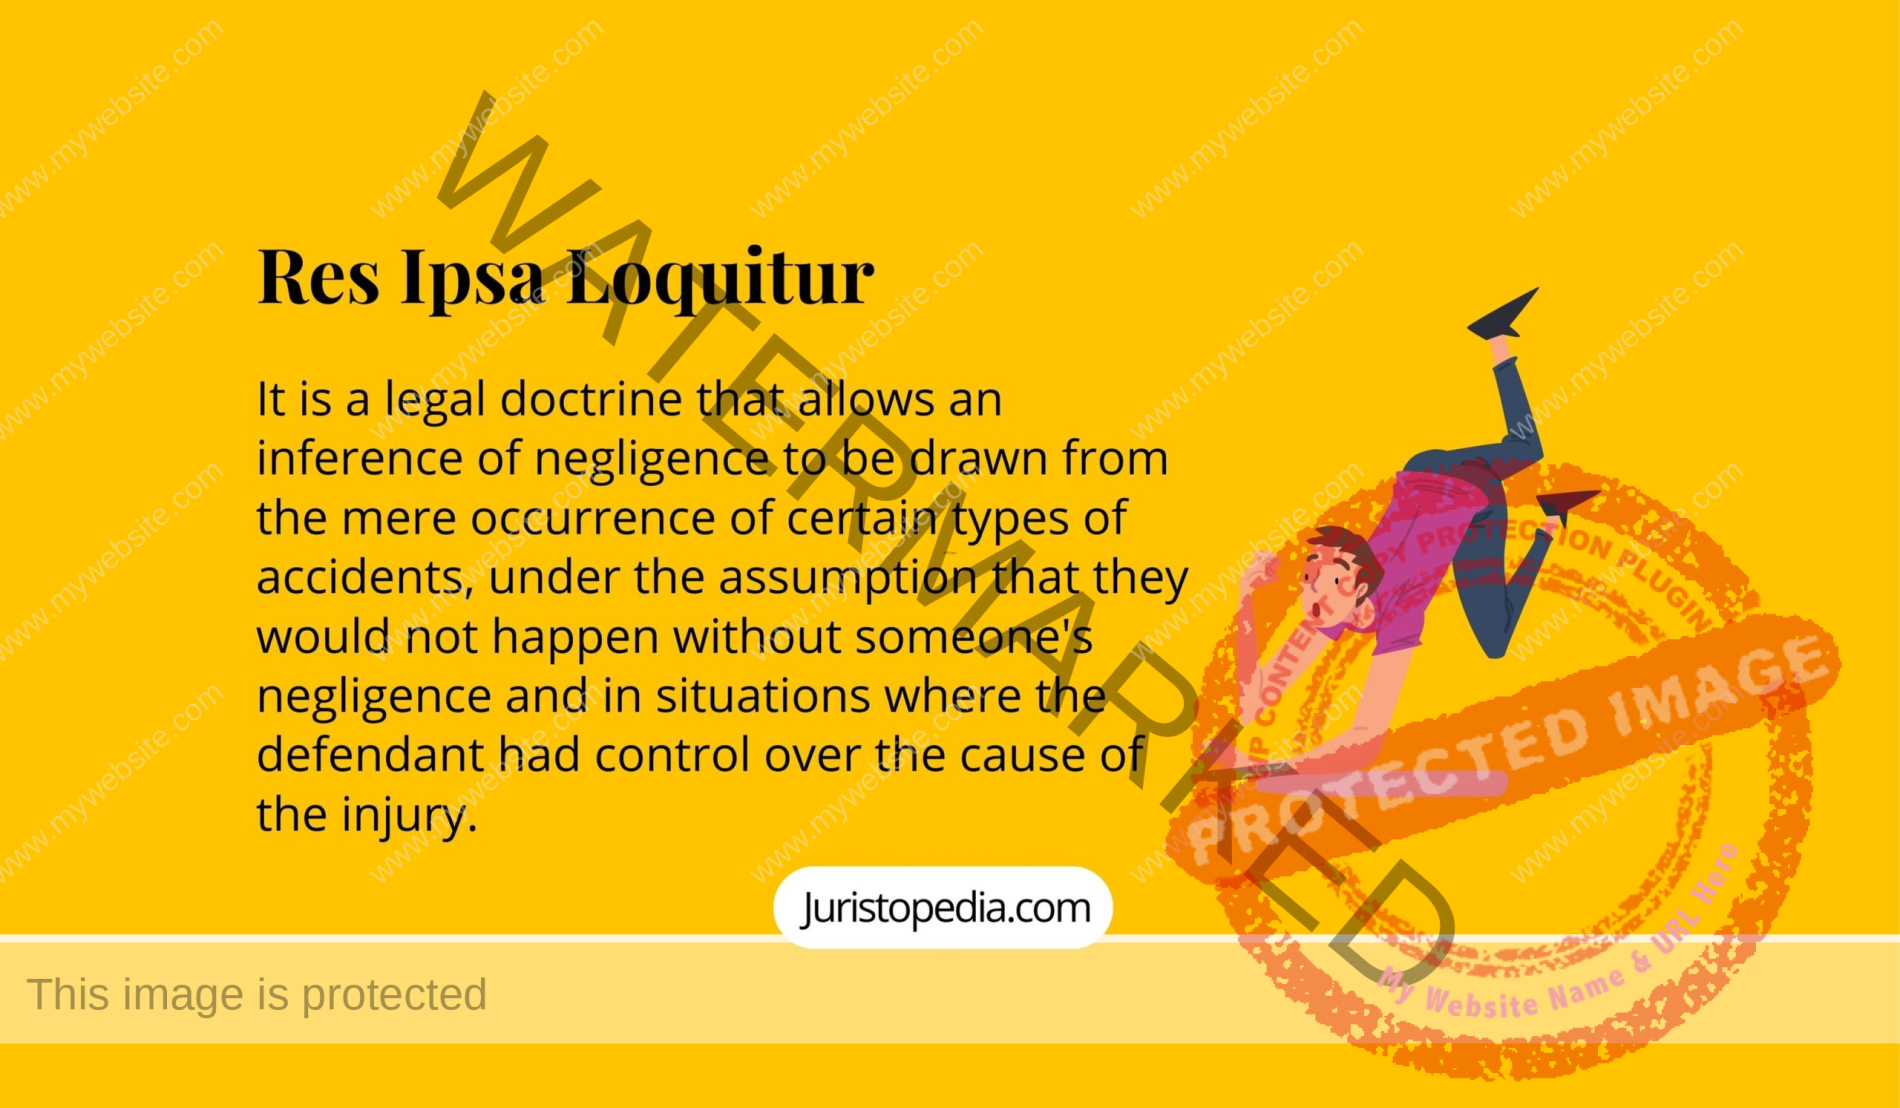 Res Ipsa Loquitur - personal injury - tort - negligence - liability